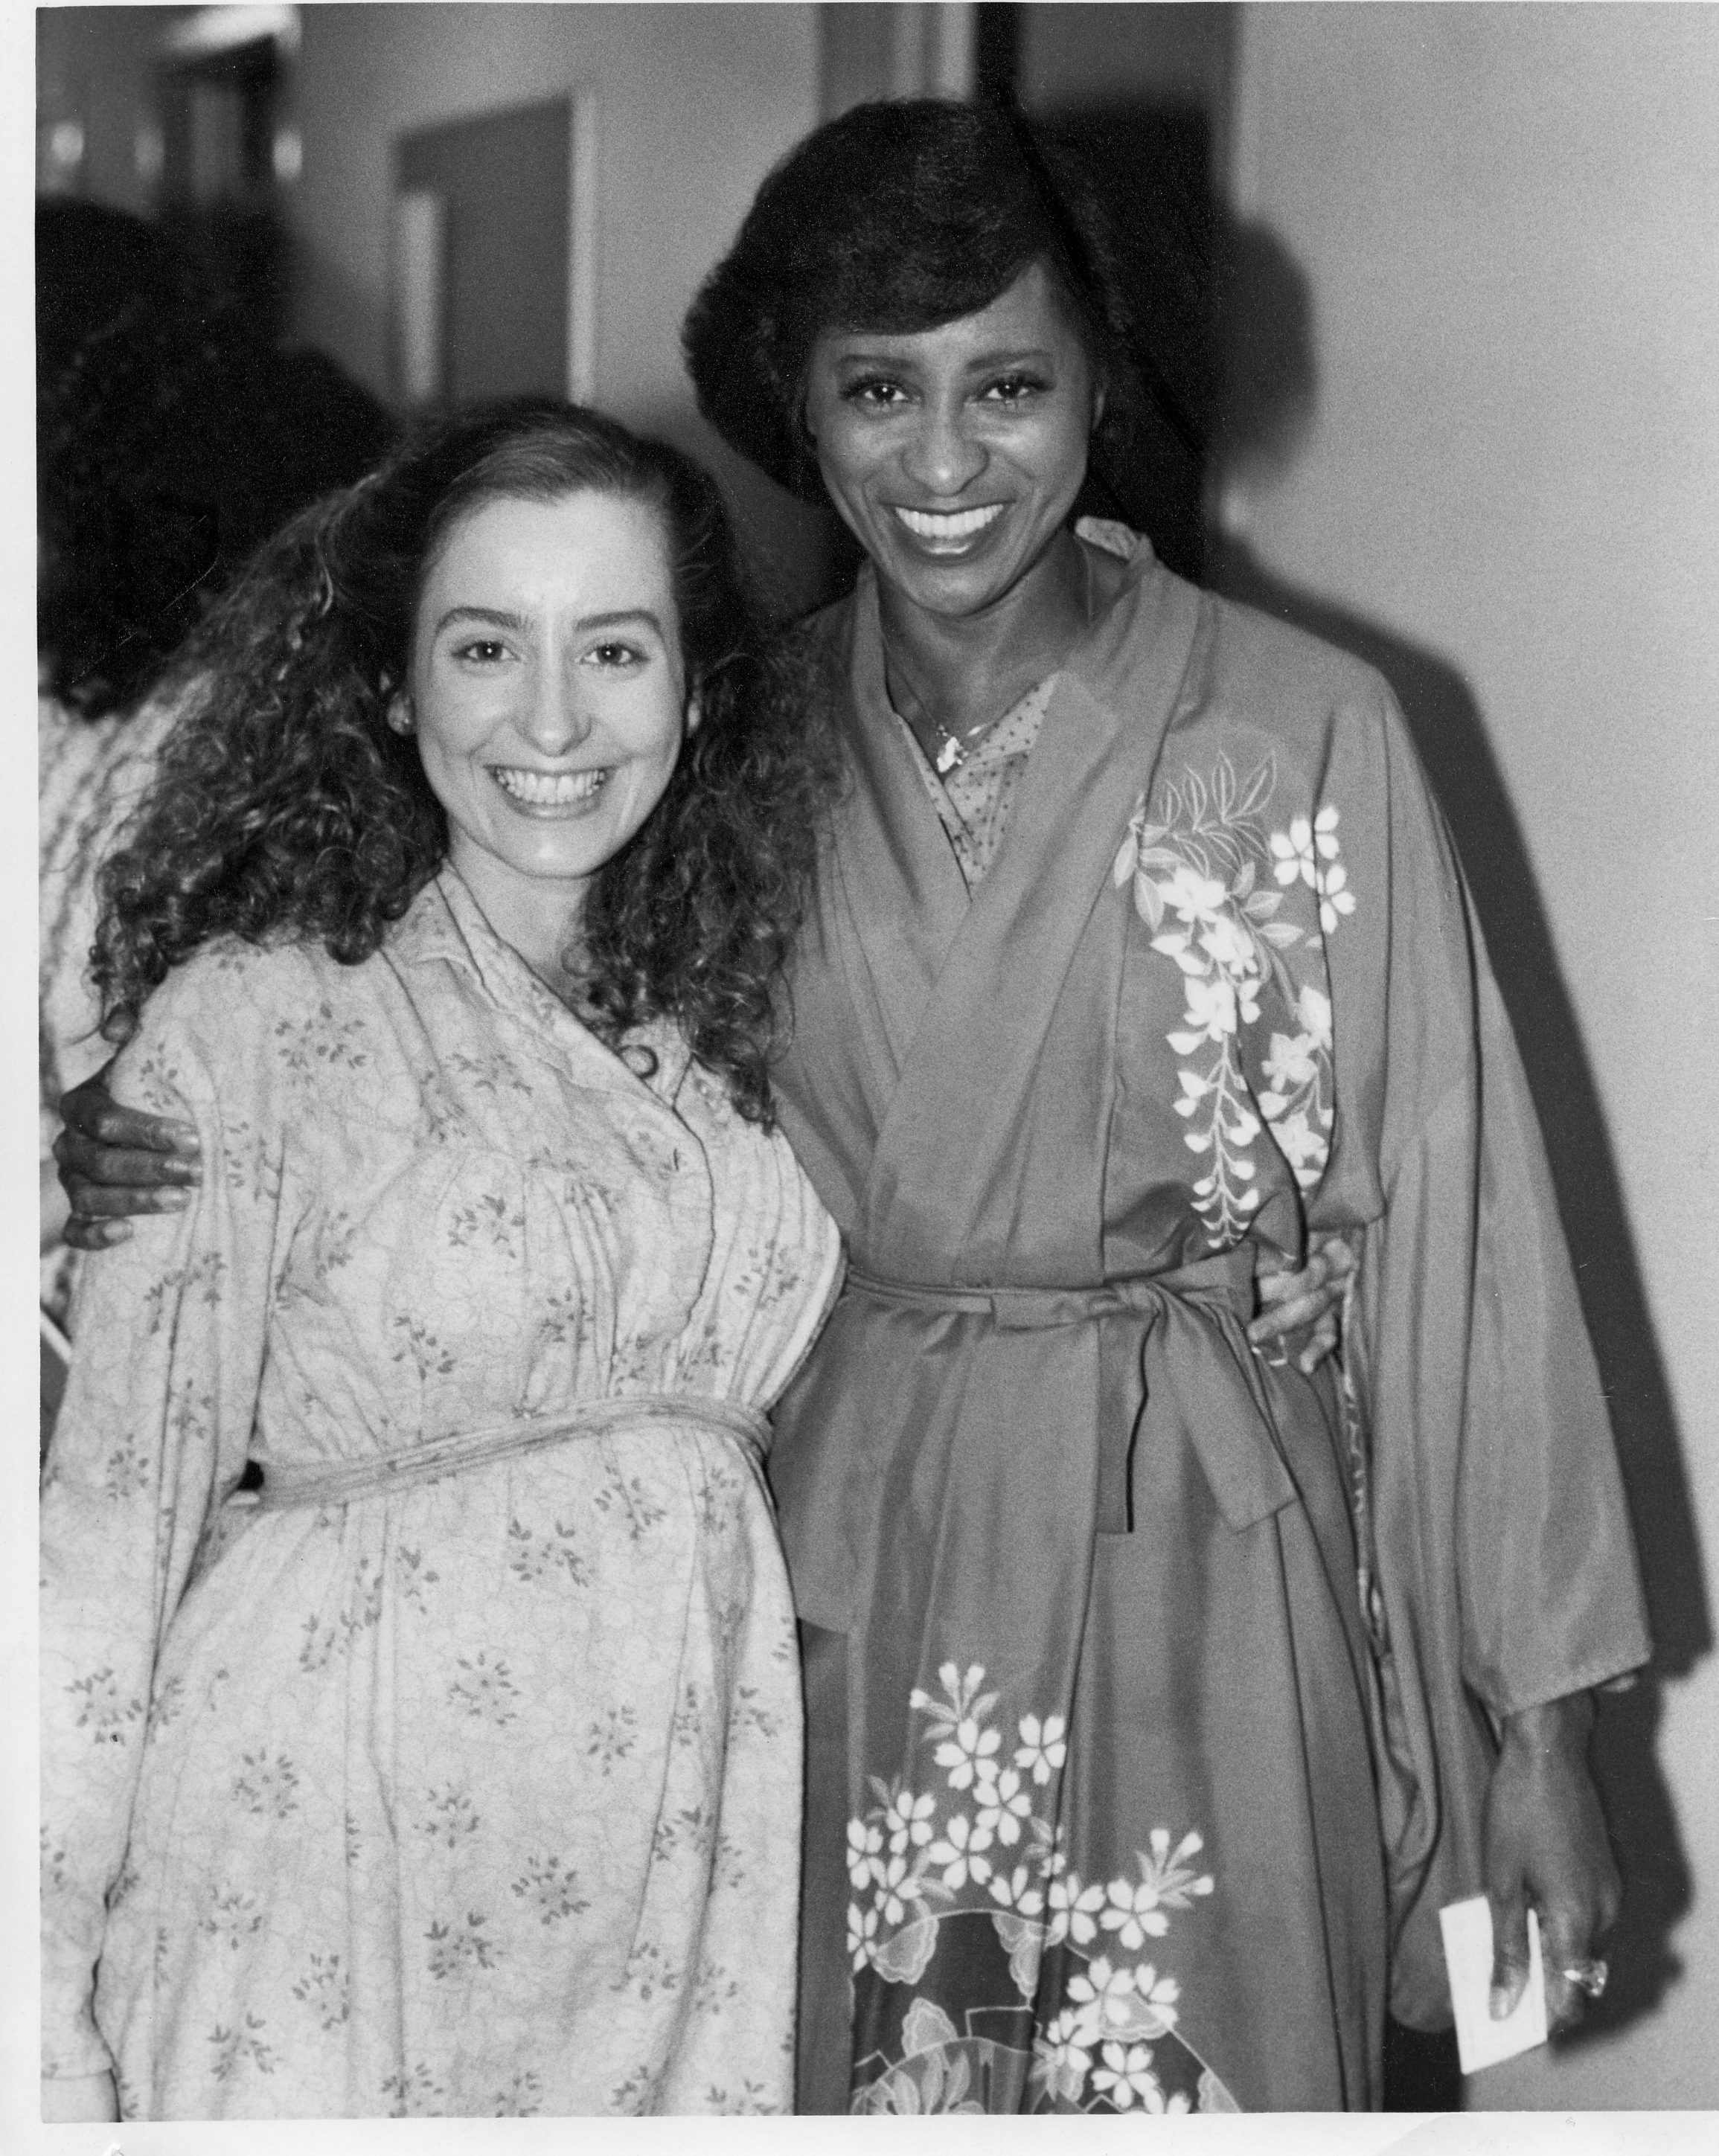 Great working with Marla Gibbs in The Jeffersons.